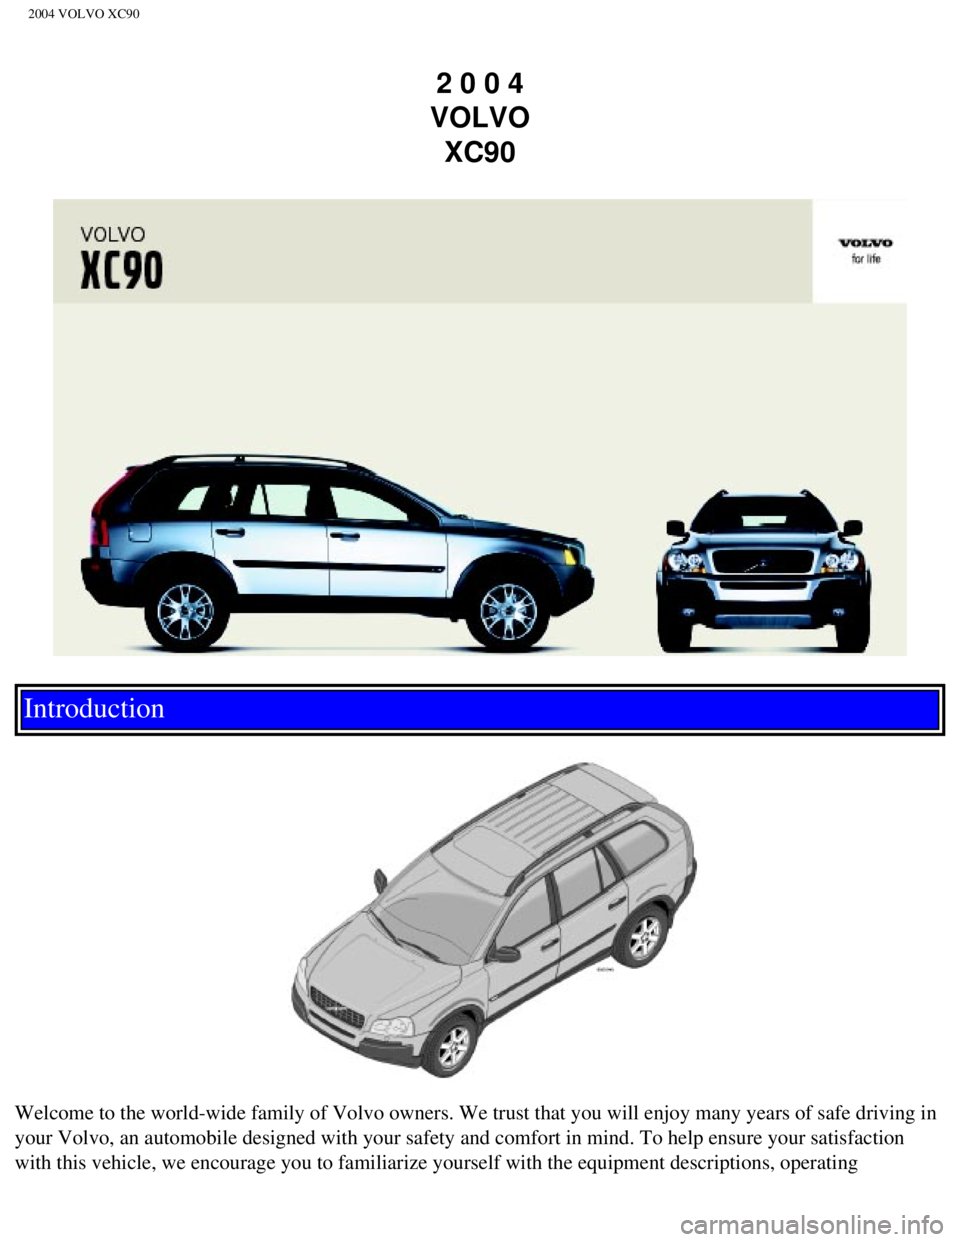 VOLVO XC90 2004  Owners Manual 
2004 VOLVO XC90
2 0 0 4  
VOLVO  XC90
Introduction 
 
 
Welcome to the world-wide family of Volvo owners. We trust that you will\
 enjoy many years of safe driving in 
your Volvo, an automobile desig